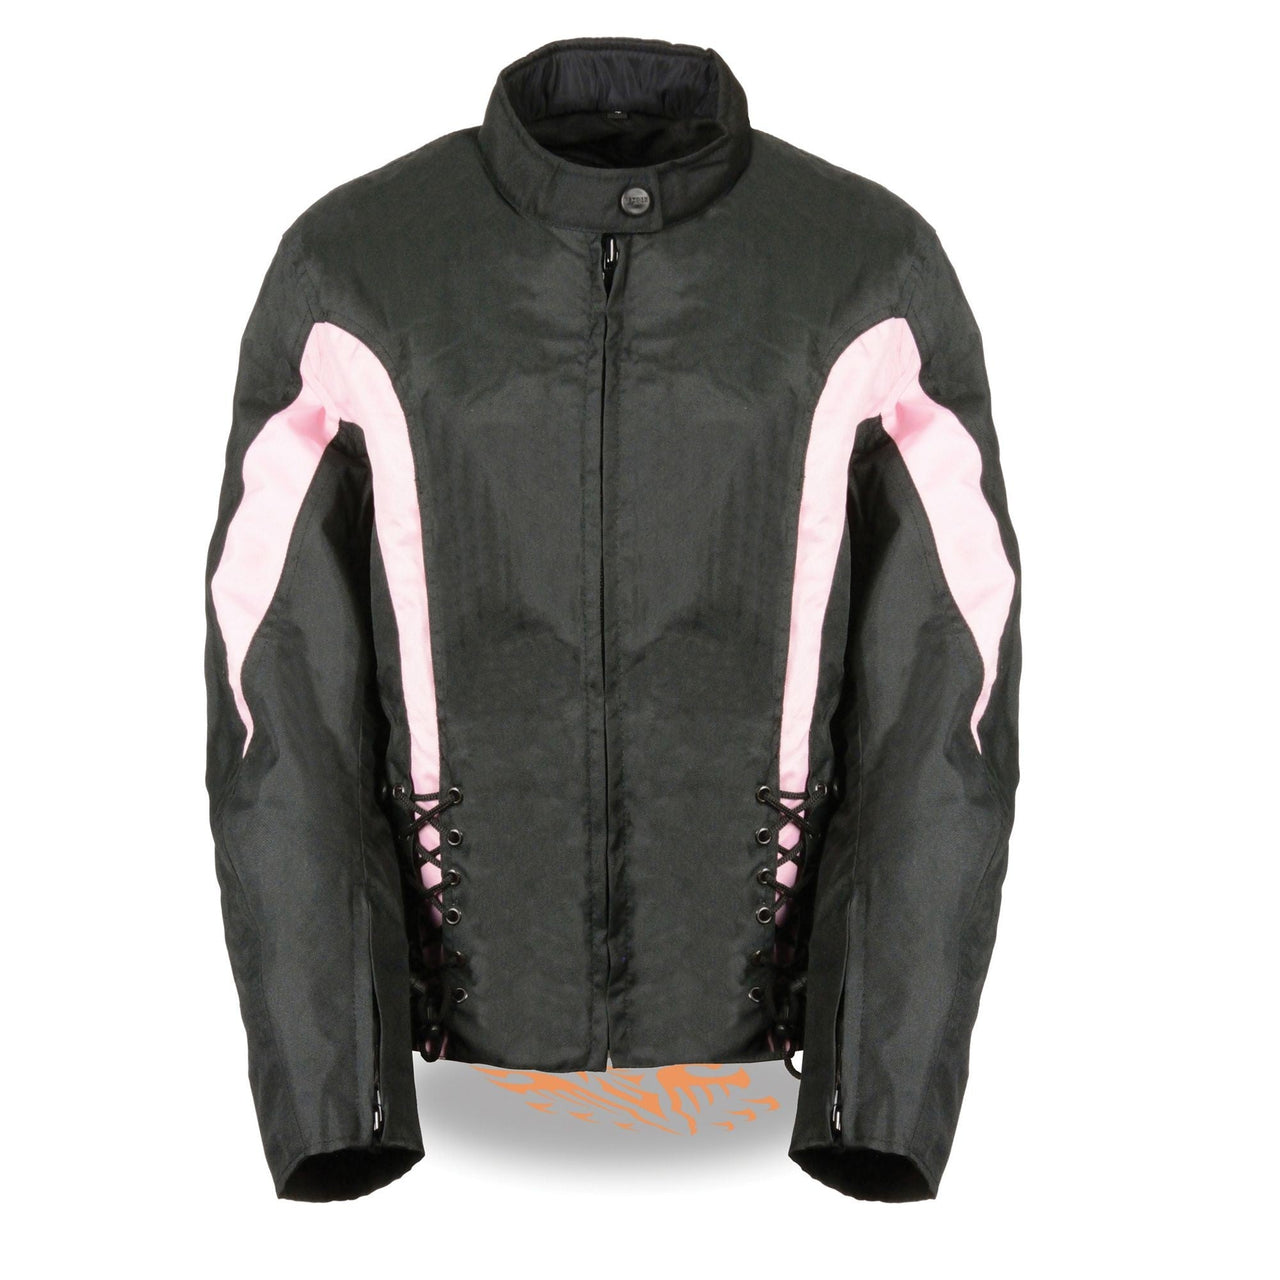 Ladies Textile Jacket w/ Side Stretch & Lacing - HighwayLeather